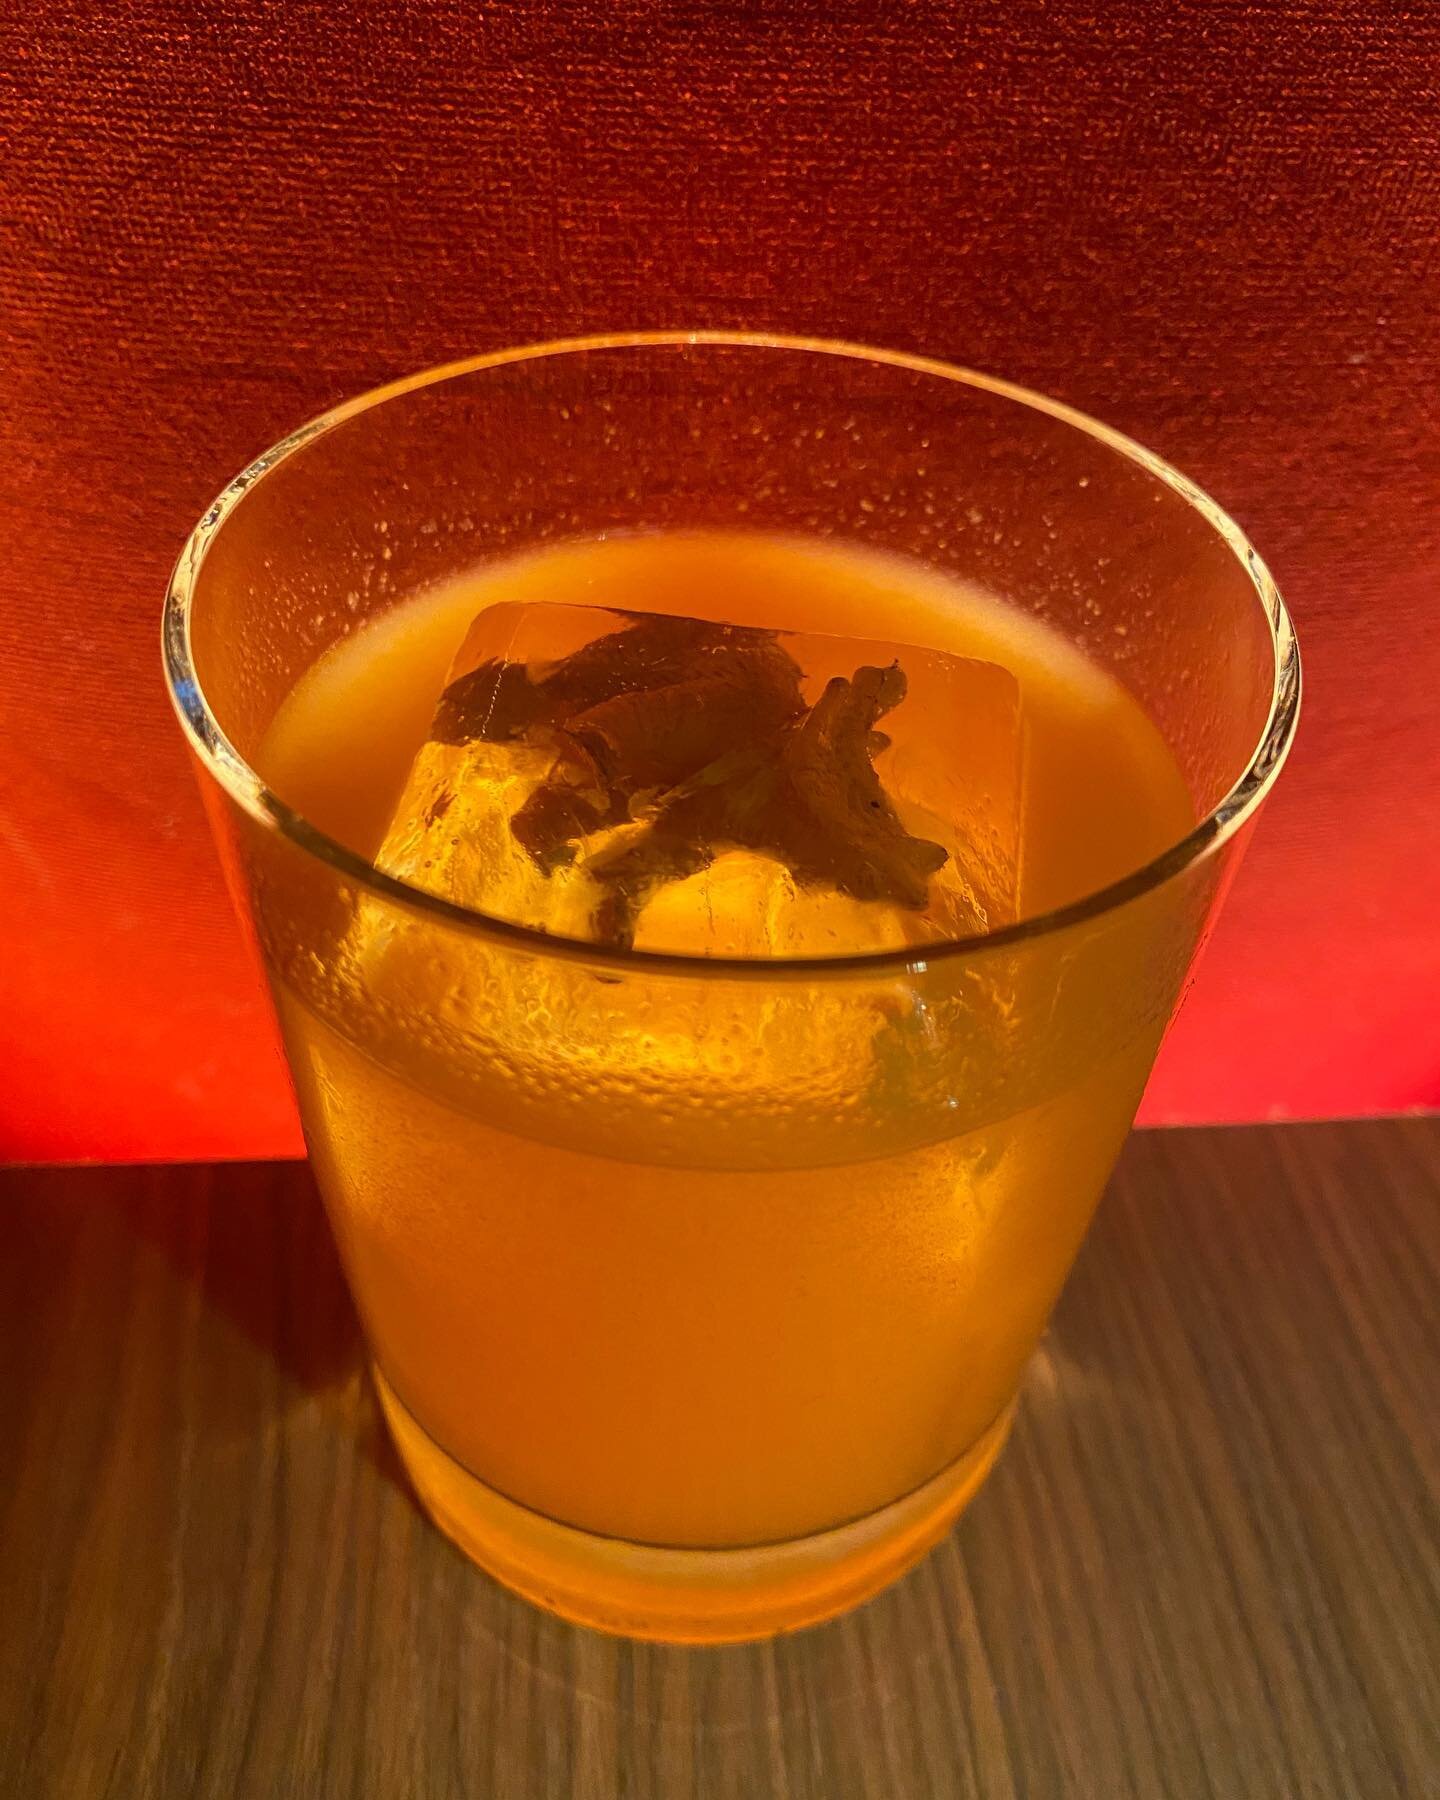 Welcome...to Jurassic Park! Pictured here is &ldquo;Life Finds a Way&rdquo;, our Jurassic inspired cocktail in the drive-in theater section of our menu. Juicy and tropical, it features rum agricole, passionfruit, mango, and ginger. Perfect for these 